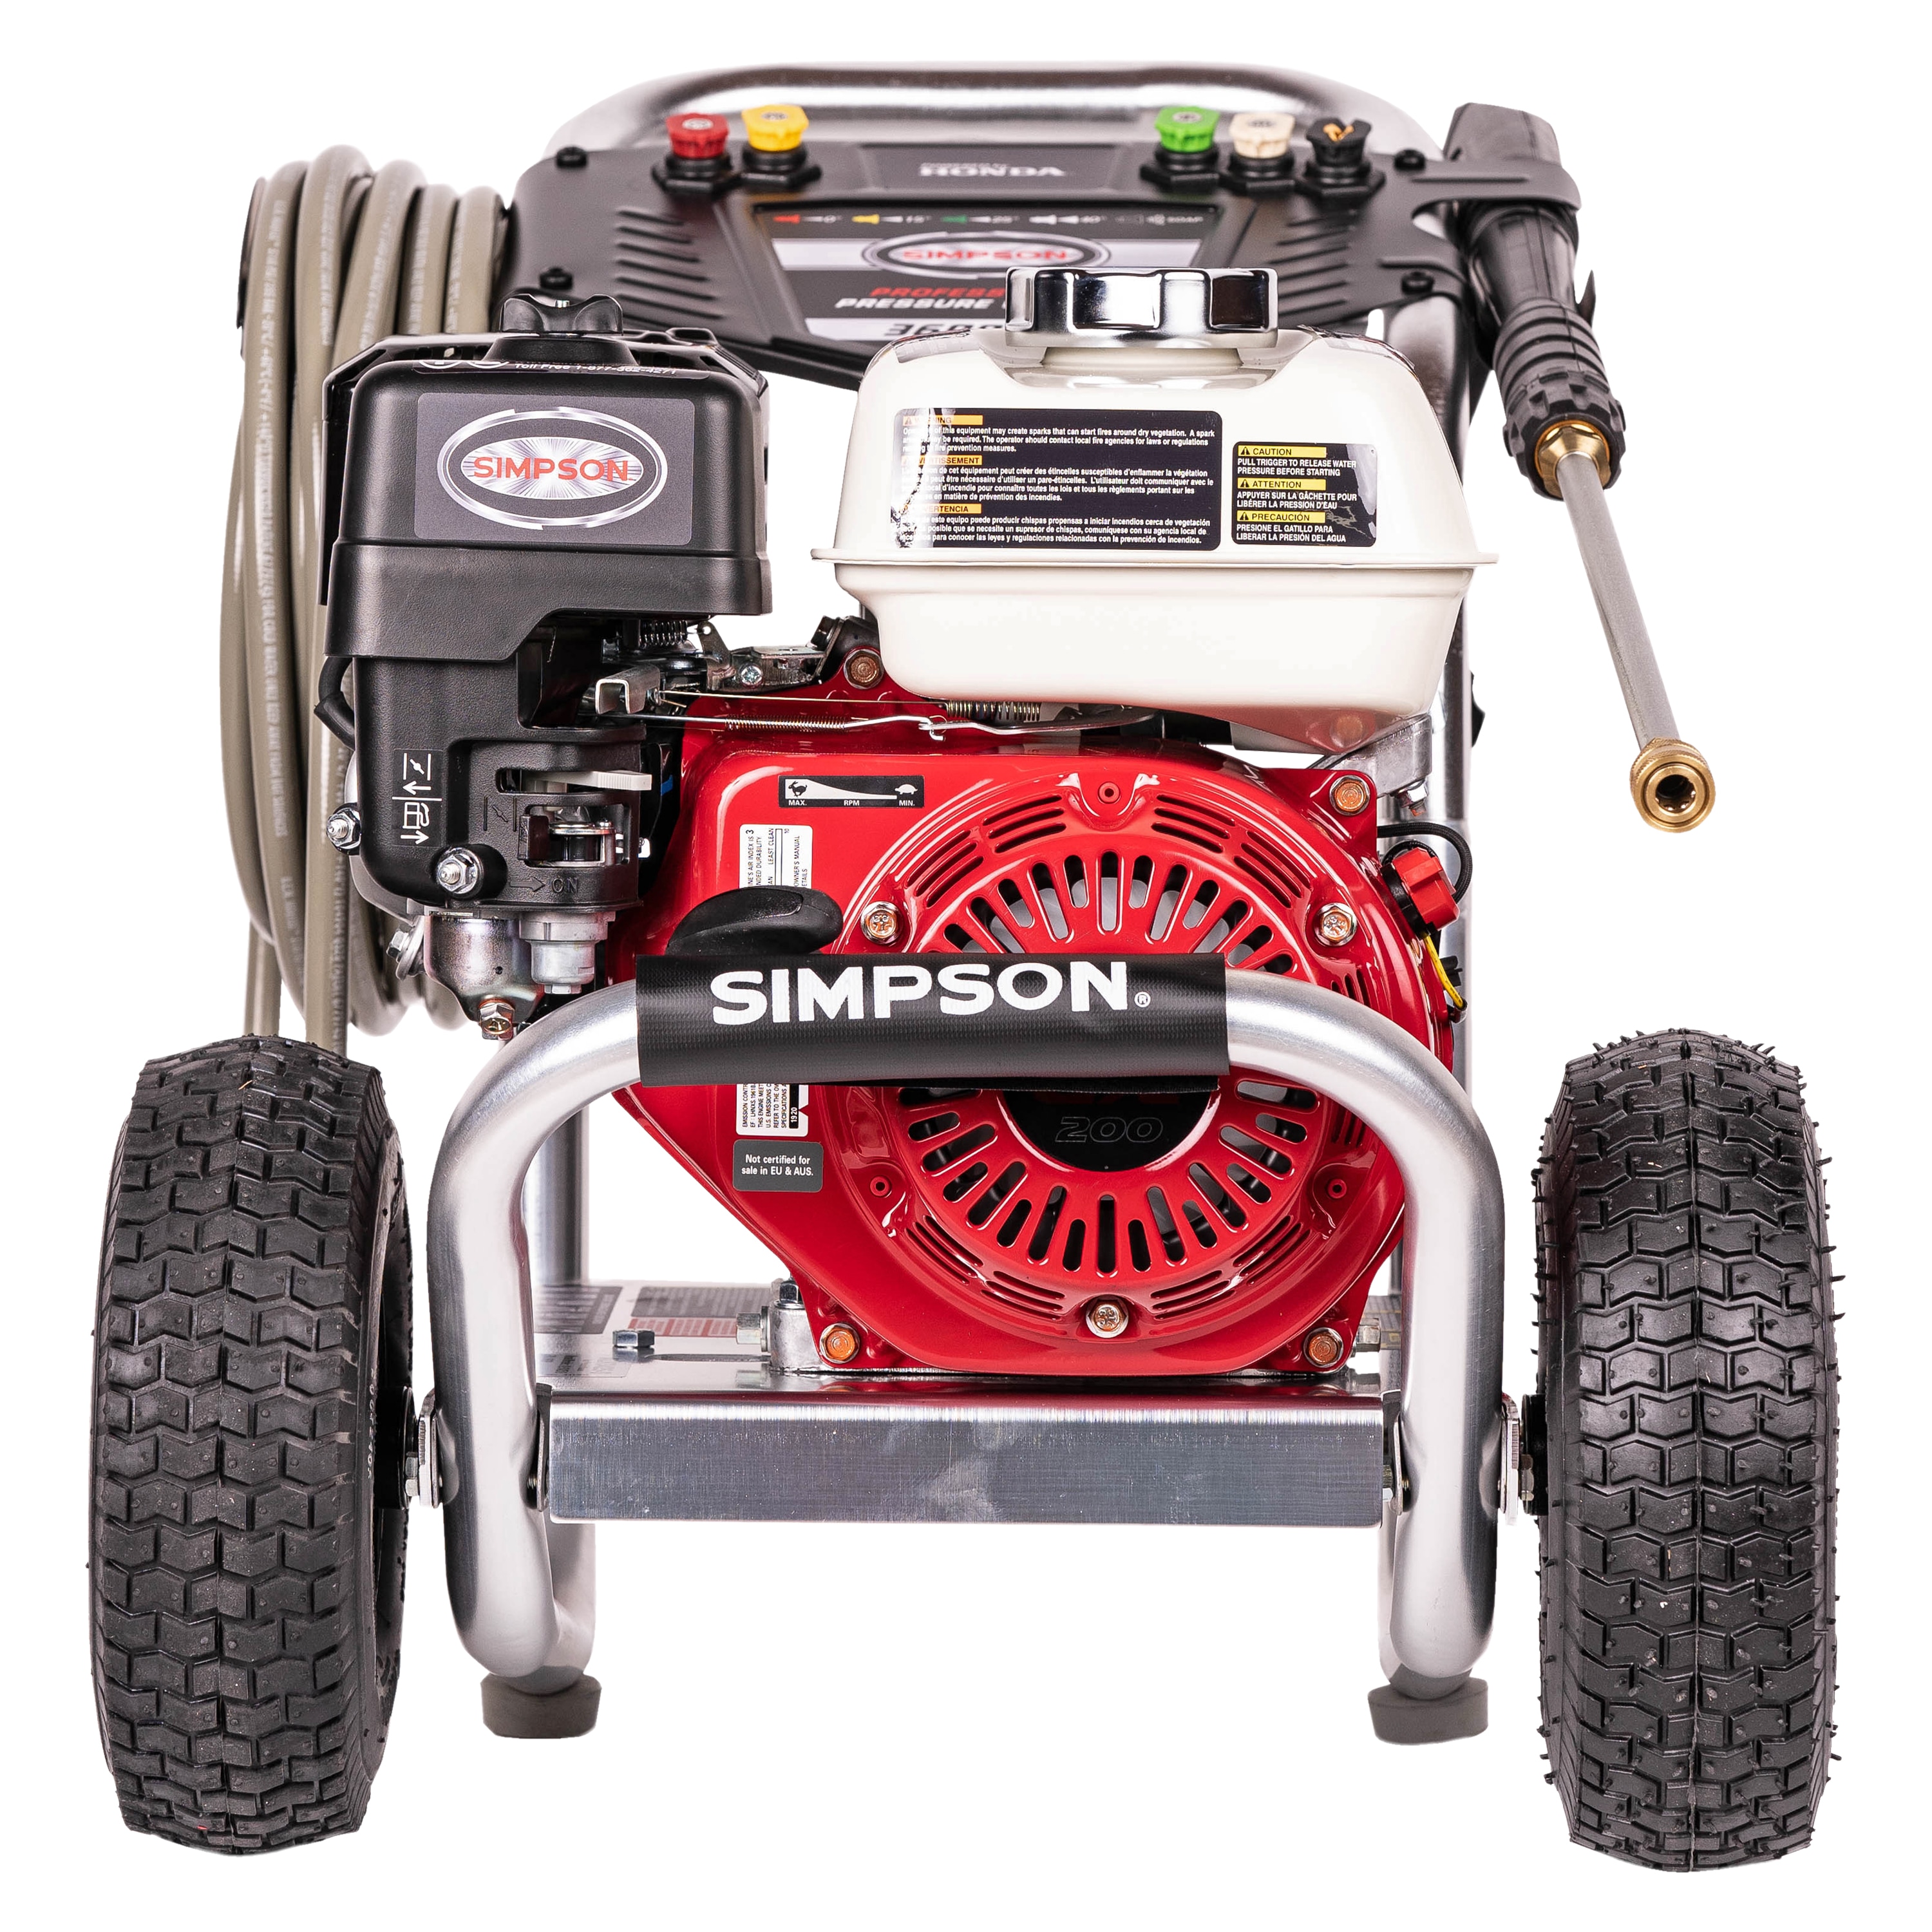 Best ms60920 simpson pressure washer parts: Restore Performance With These Tips